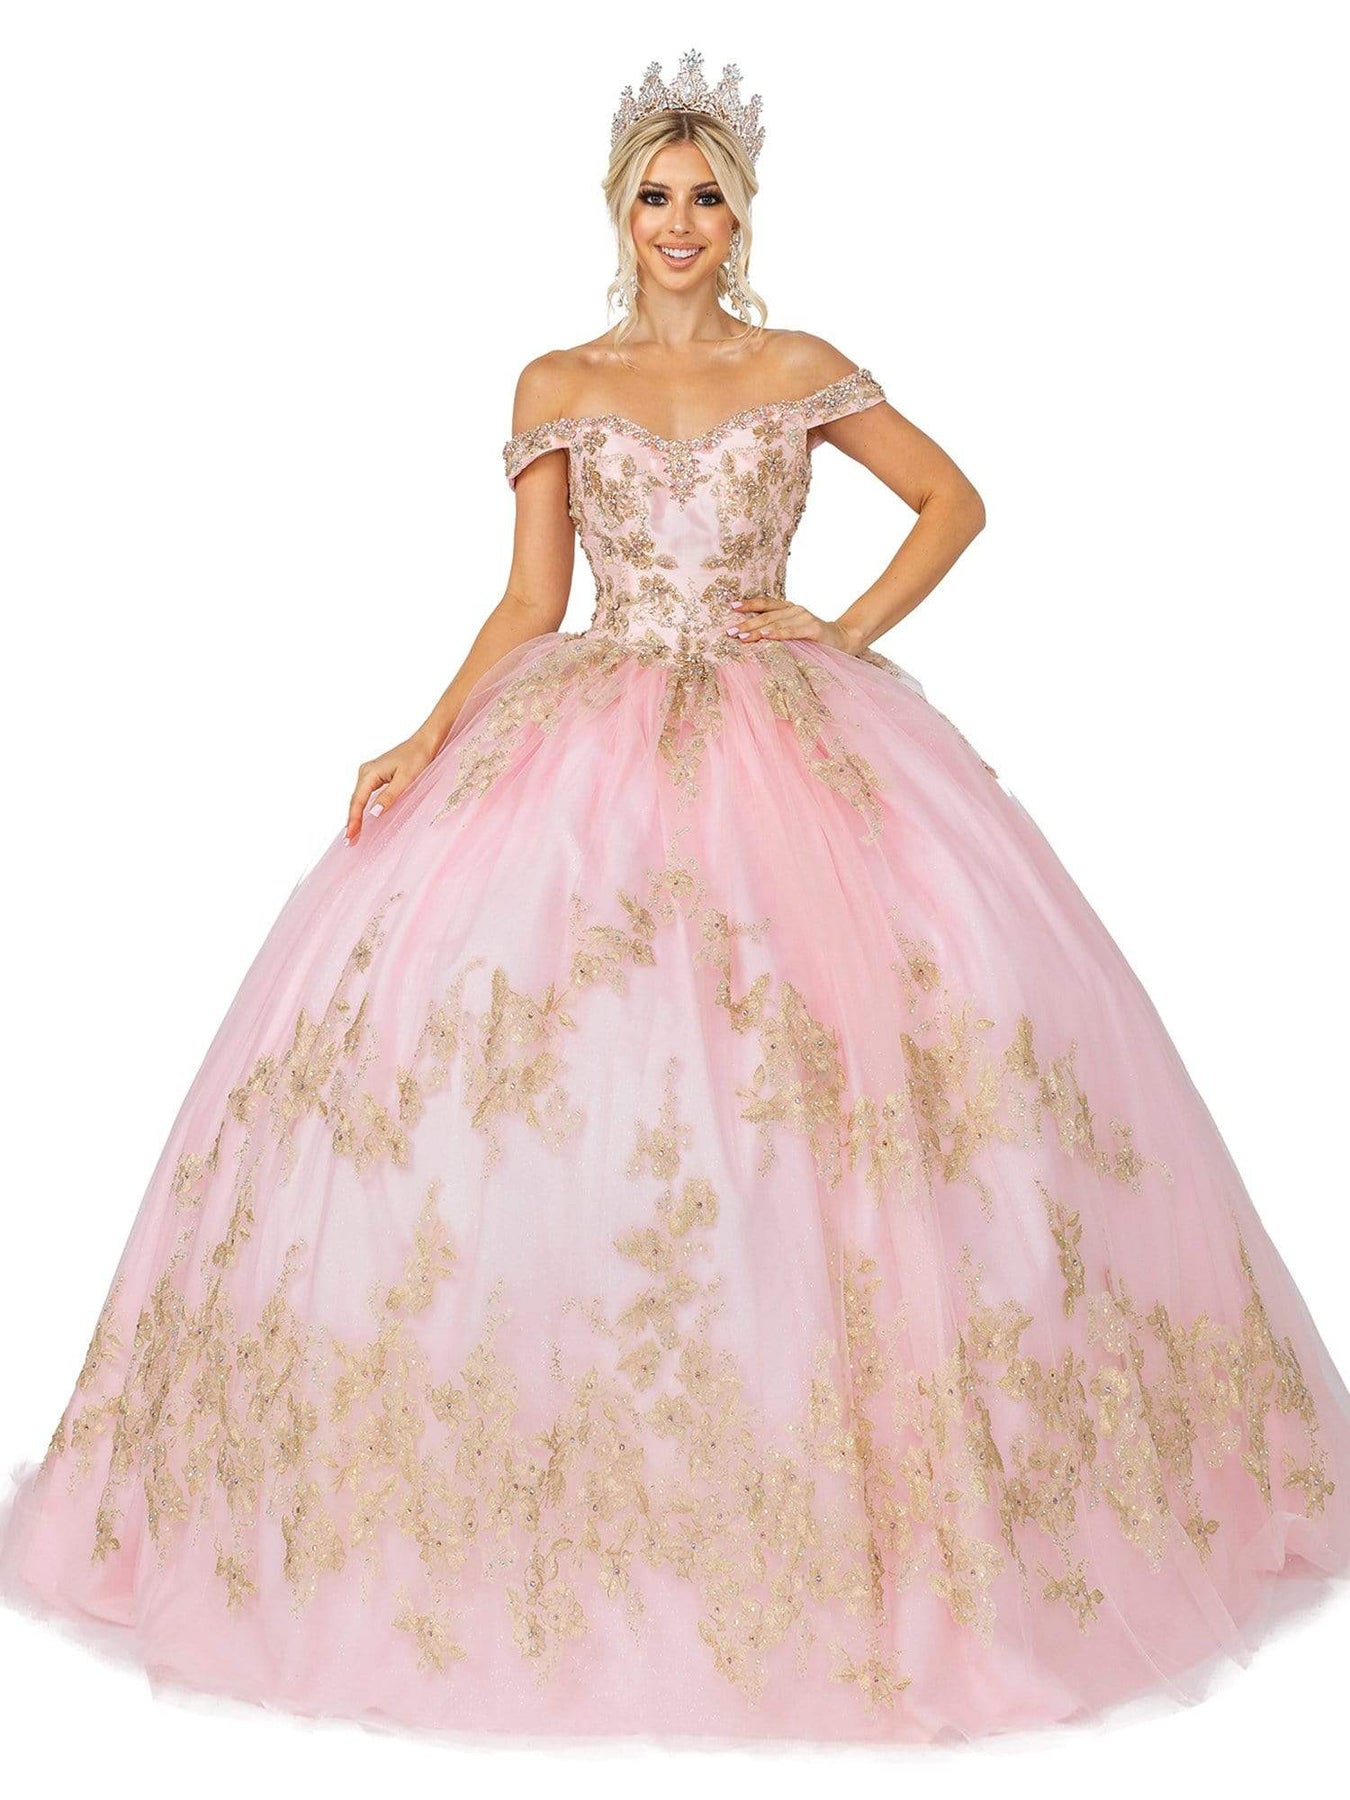 Dancing Queen - 1584 Rhinestone Lace Applique Gown Special Occasion Dress In Pink